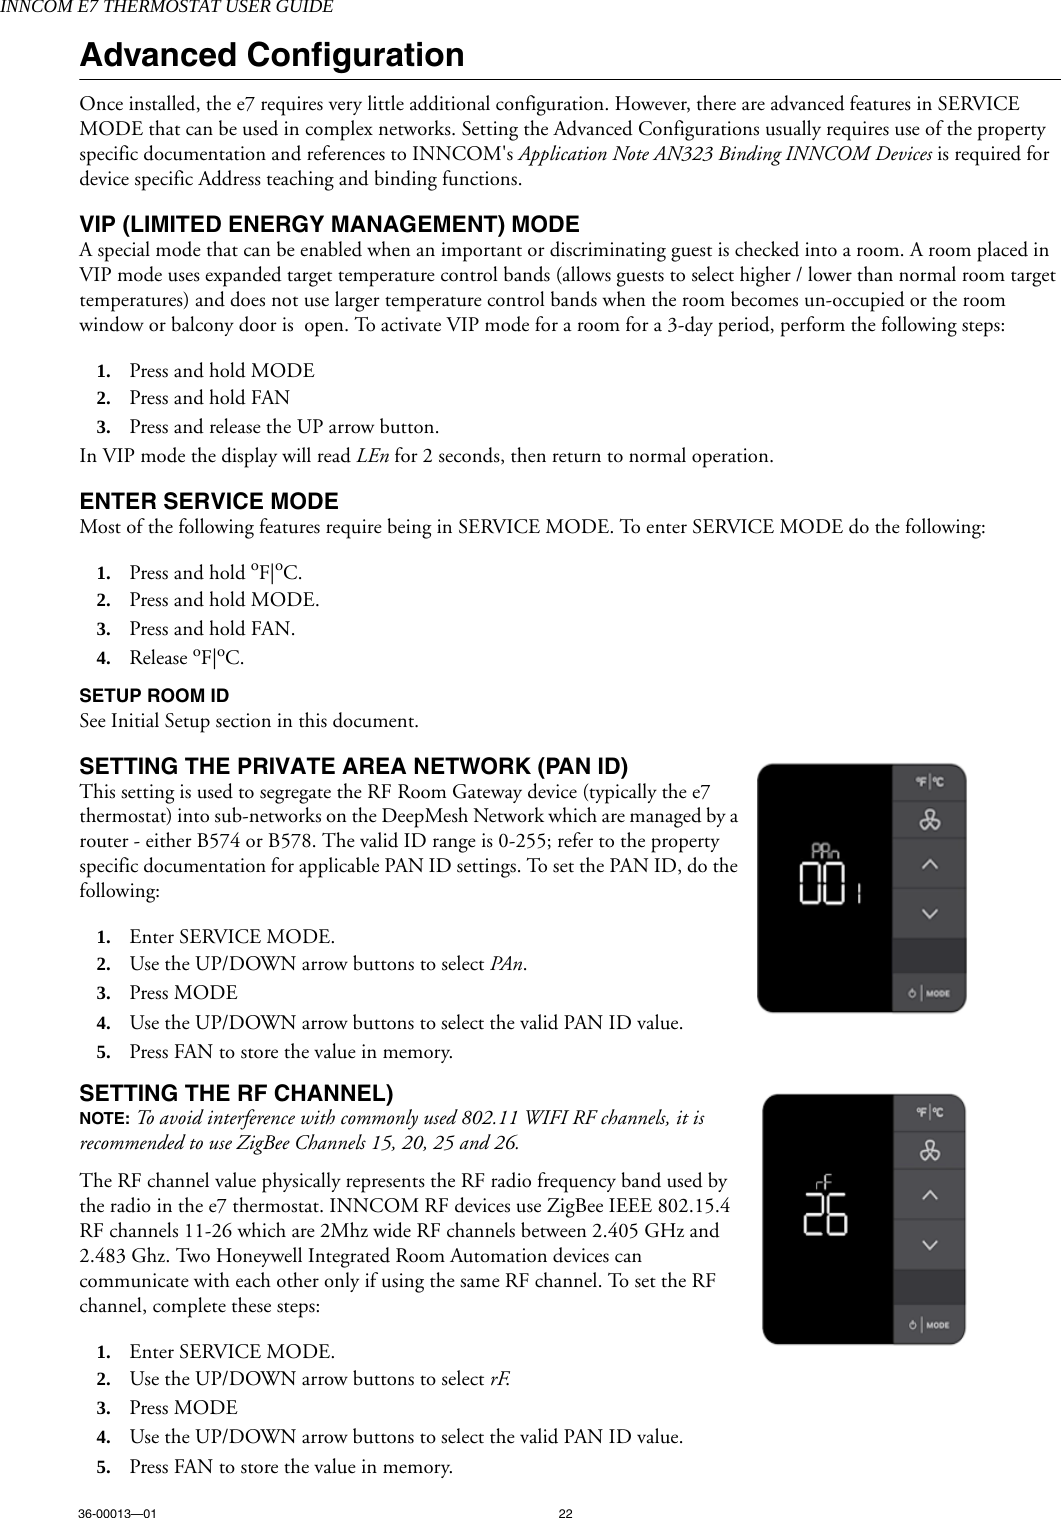 INNCOM E7 THERMOSTAT USER GUIDE36-00013—01 22Advanced ConfigurationOnce installed, the e7 requires very little additional configuration. However, there are advanced features in SERVICE MODE that can be used in complex networks. Setting the Advanced Configurations usually requires use of the property specific documentation and references to INNCOM&apos;s Application Note AN323 Binding INNCOM Devices is required for device specific Address teaching and binding functions.VIP (LIMITED ENERGY MANAGEMENT) MODE A special mode that can be enabled when an important or discriminating guest is checked into a room. A room placed in VIP mode uses expanded target temperature control bands (allows guests to select higher / lower than normal room target temperatures) and does not use larger temperature control bands when the room becomes un-occupied or the room window or balcony door is  open. To activate VIP mode for a room for a 3-day period, perform the following steps:1. Press and hold MODE2. Press and hold FAN3. Press and release the UP arrow button.In VIP mode the display will read LEn for 2 seconds, then return to normal operation.ENTER SERVICE MODEMost of the following features require being in SERVICE MODE. To enter SERVICE MODE do the following:1. Press and hold oF|oC.2. Press and hold MODE.3. Press and hold FAN.4. Release oF|oC.SETUP ROOM ID  See Initial Setup section in this document.SETTING THE PRIVATE AREA NETWORK (PAN ID)This setting is used to segregate the RF Room Gateway device (typically the e7 thermostat) into sub-networks on the DeepMesh Network which are managed by a router - either B574 or B578. The valid ID range is 0-255; refer to the property specific documentation for applicable PAN ID settings. To set the PAN ID, do the following:1. Enter SERVICE MODE.2. Use the UP/DOWN arrow buttons to select PAn.3. Press MODE 4. Use the UP/DOWN arrow buttons to select the valid PAN ID value.5. Press FAN to store the value in memory.SETTING THE RF CHANNEL)NOTE: To avoid interference with commonly used 802.11 WIFI RF channels, it is recommended to use ZigBee Channels 15, 20, 25 and 26.The RF channel value physically represents the RF radio frequency band used by the radio in the e7 thermostat. INNCOM RF devices use ZigBee IEEE 802.15.4 RF channels 11-26 which are 2Mhz wide RF channels between 2.405 GHz and 2.483 Ghz. Two Honeywell Integrated Room Automation devices can communicate with each other only if using the same RF channel. To set the RF channel, complete these steps:  1. Enter SERVICE MODE.2. Use the UP/DOWN arrow buttons to select rF. 3. Press MODE 4. Use the UP/DOWN arrow buttons to select the valid PAN ID value.5. Press FAN to store the value in memory.